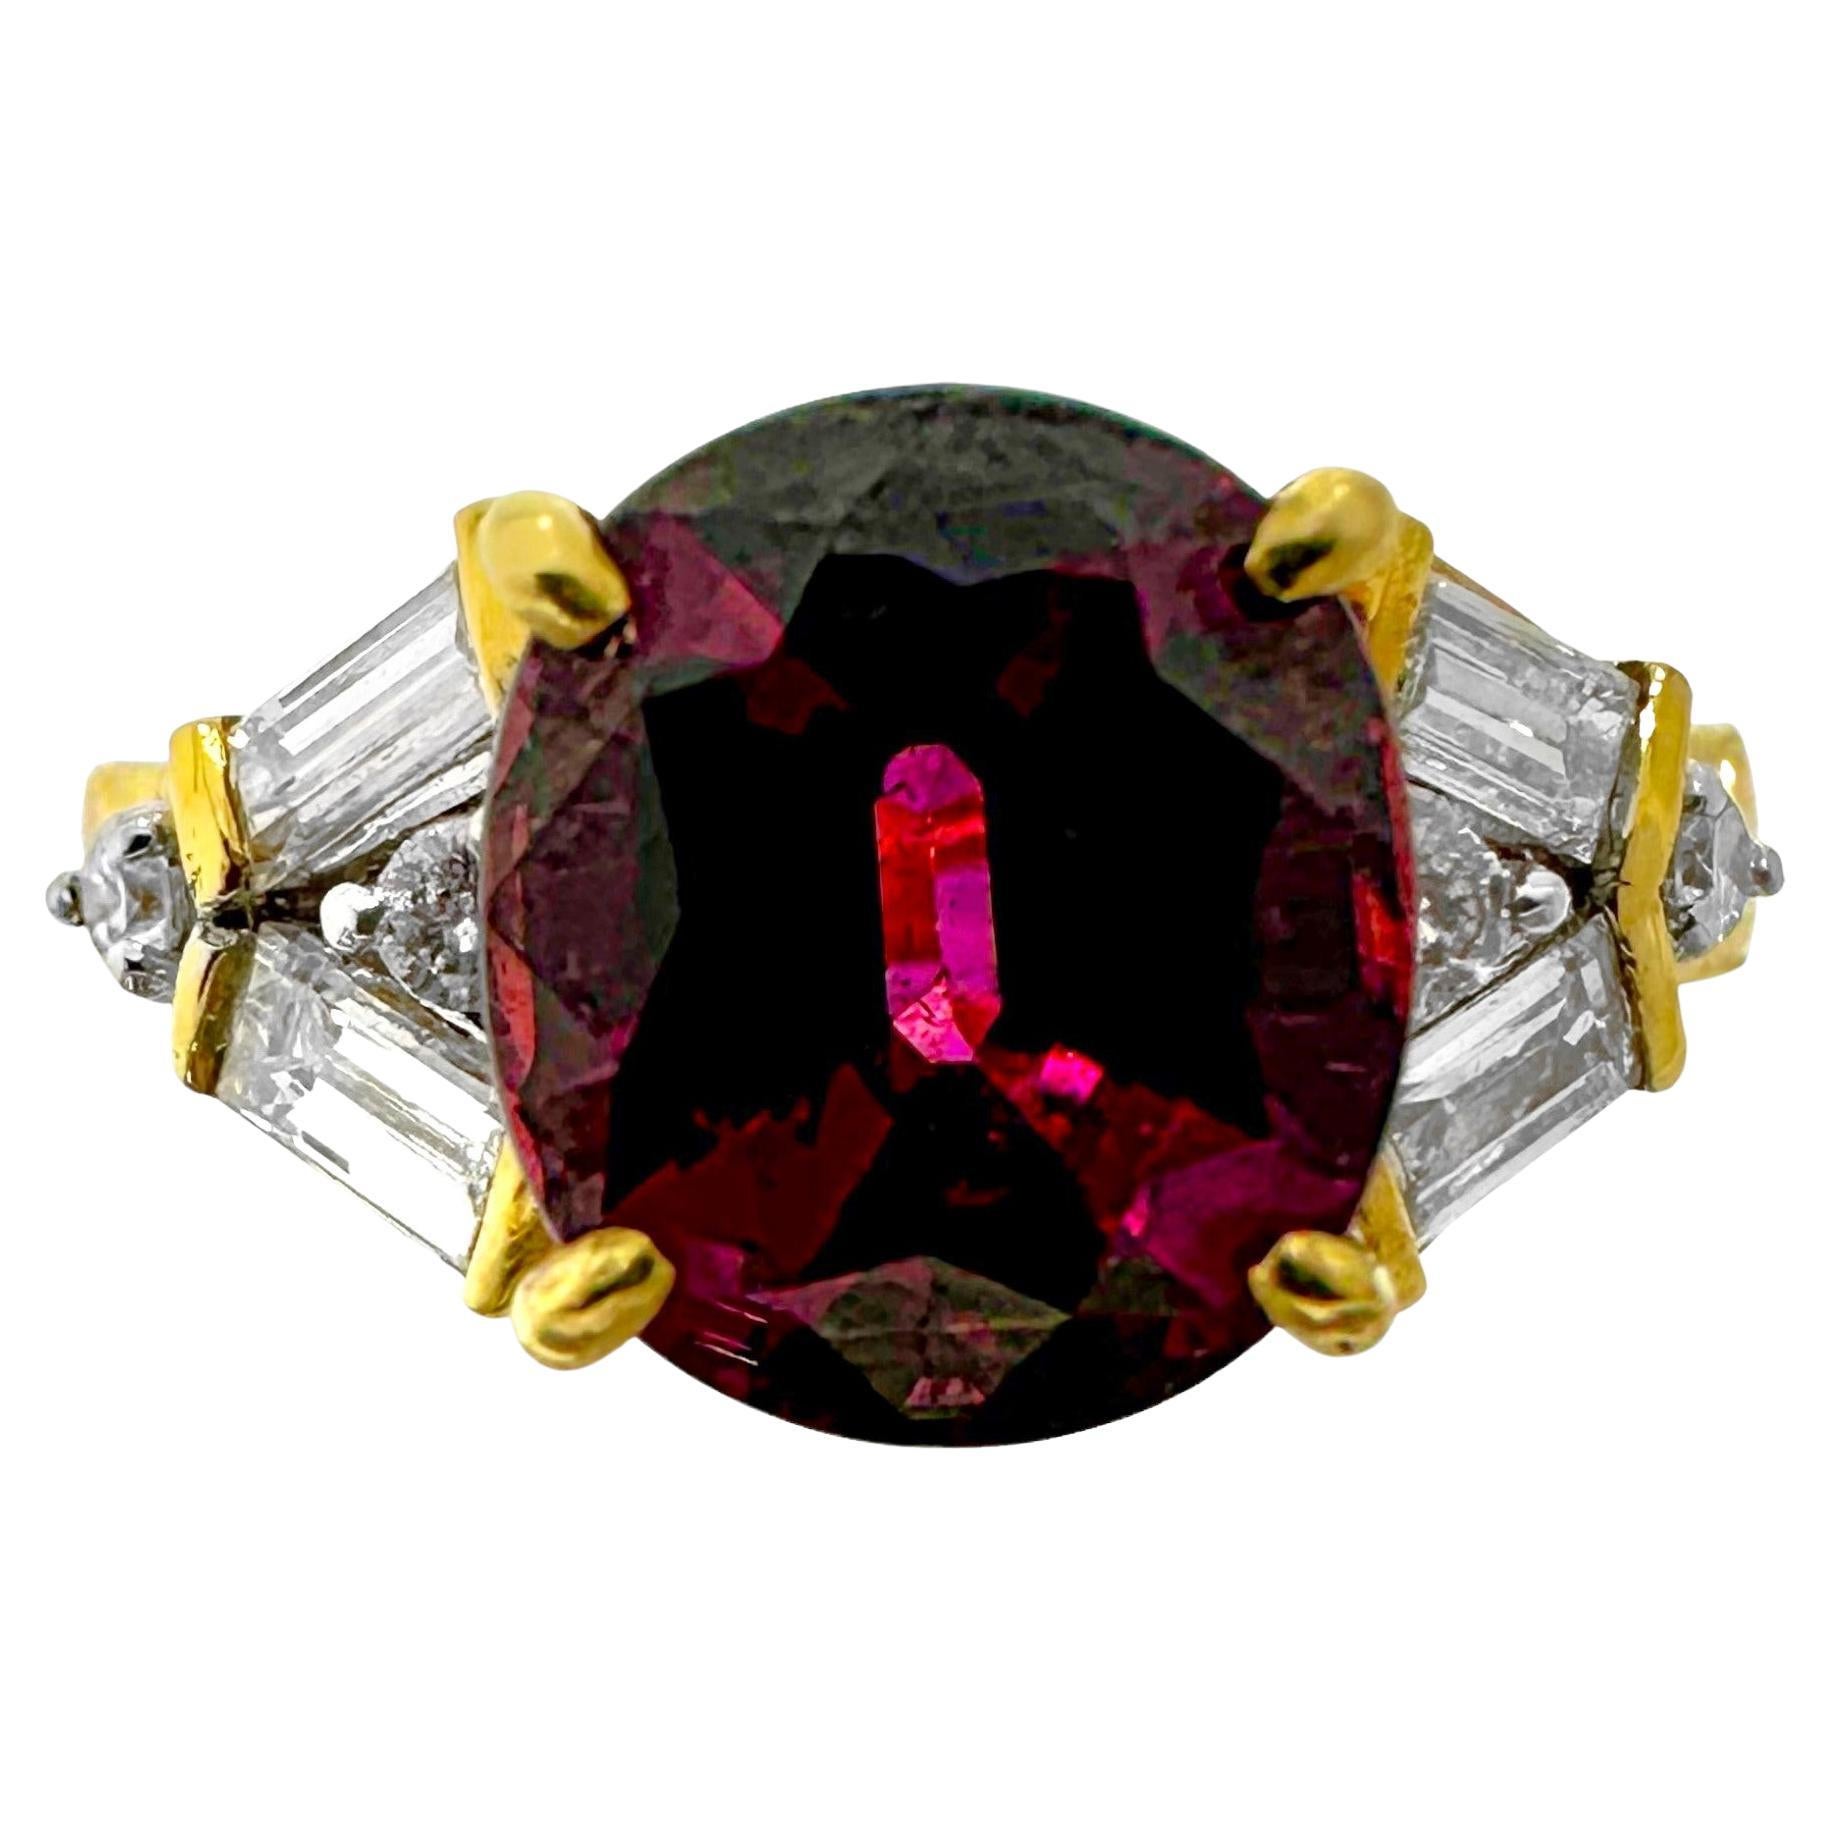 18k Yellow Gold Ring with 4.76ct Red Wine Colored, Oval Shaped Garnet & Diamonds